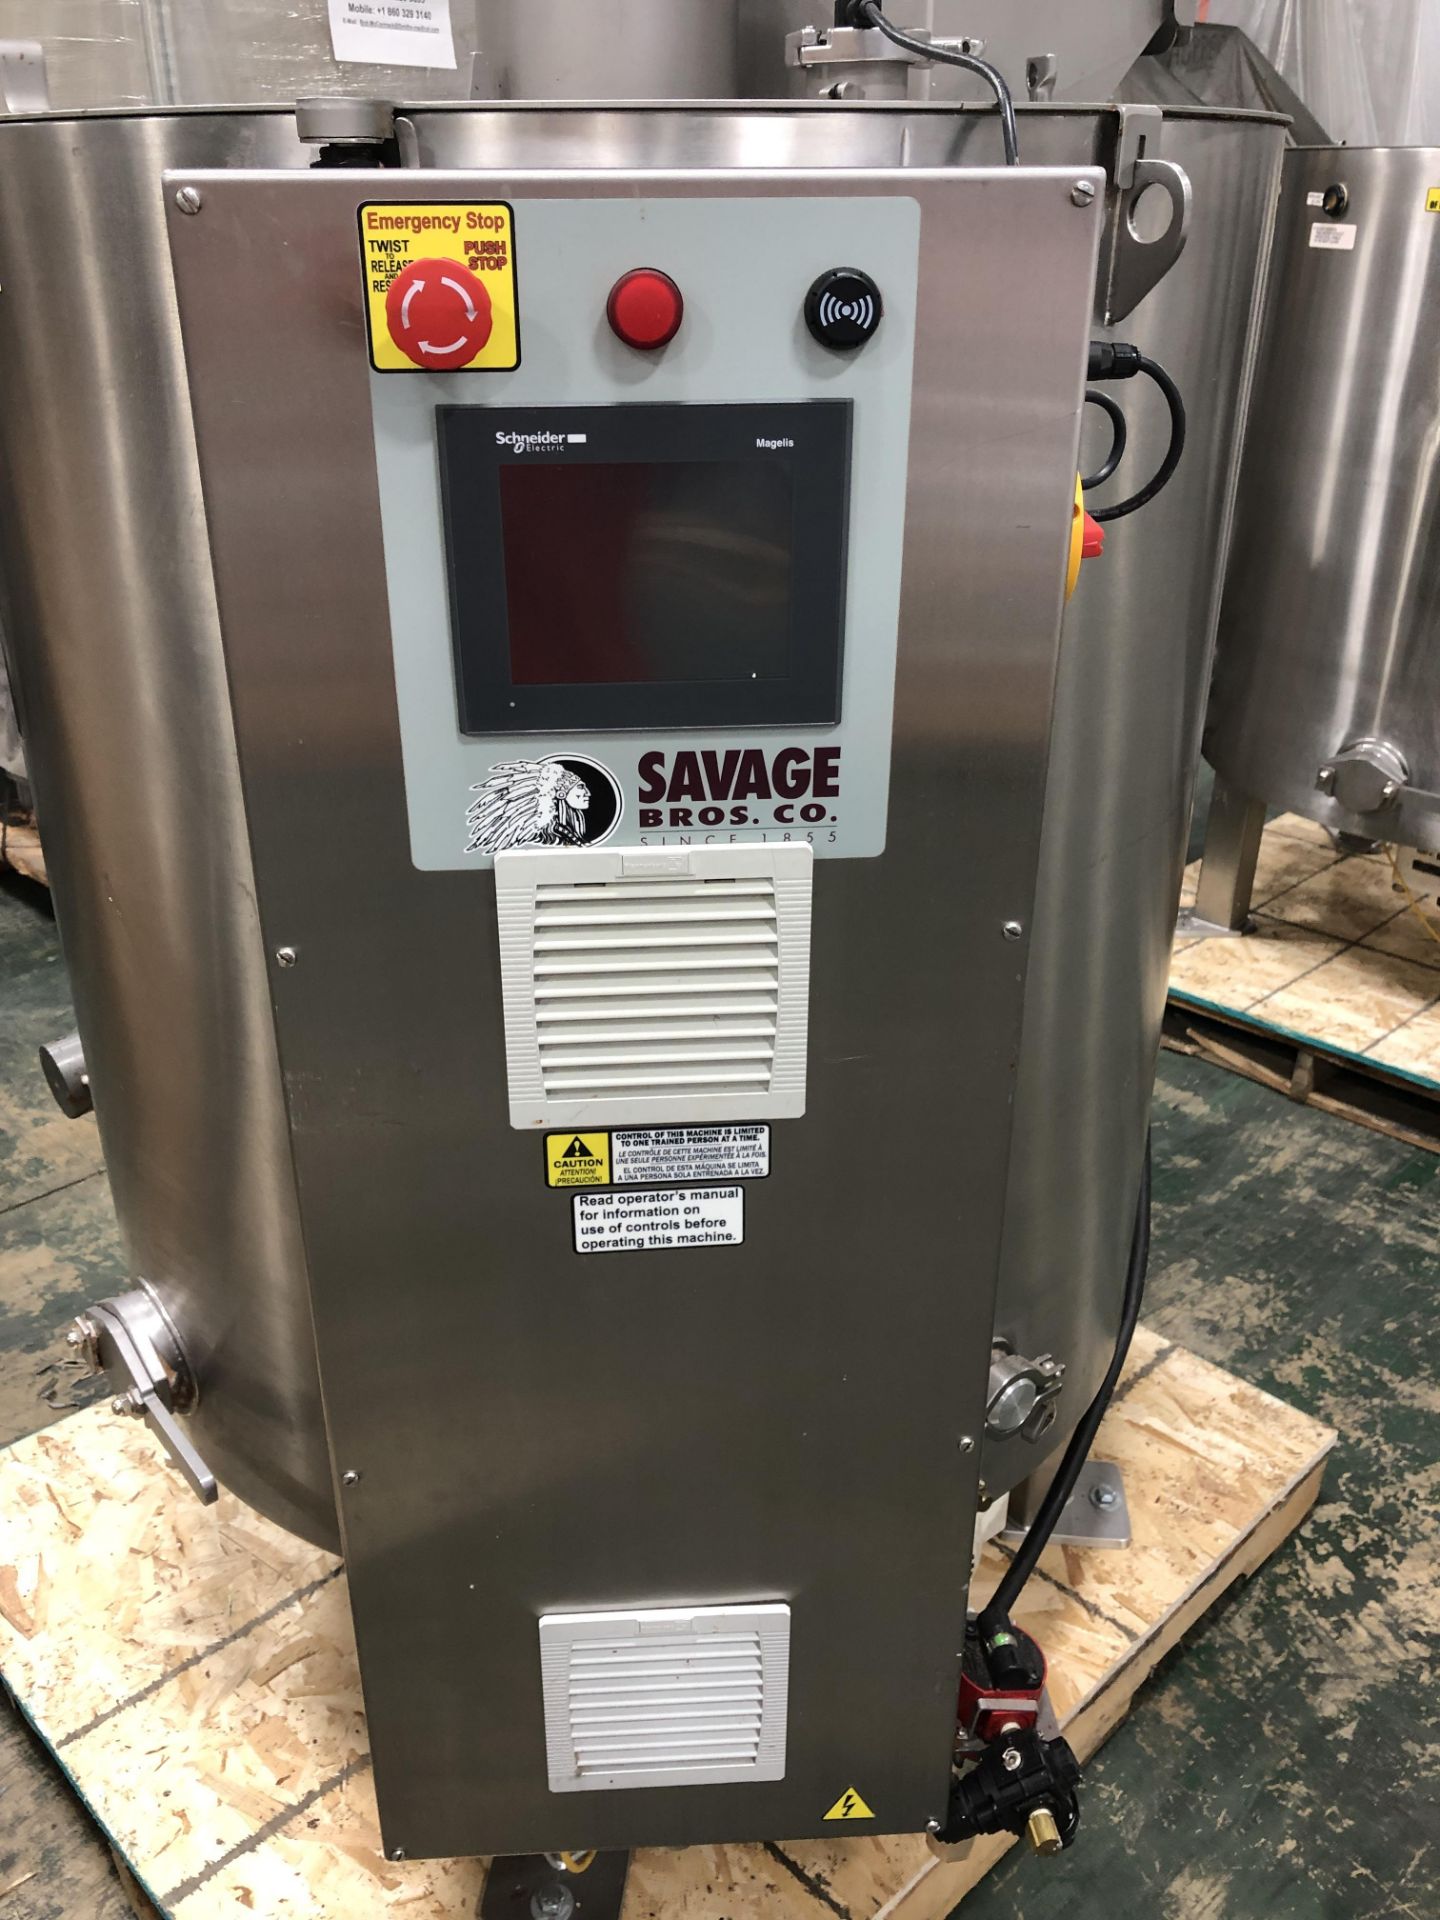 Savage Stainless Steel 1250-lb Chocolate Melter, model 0974-36, with PLC touchscreen controls, - Image 3 of 8